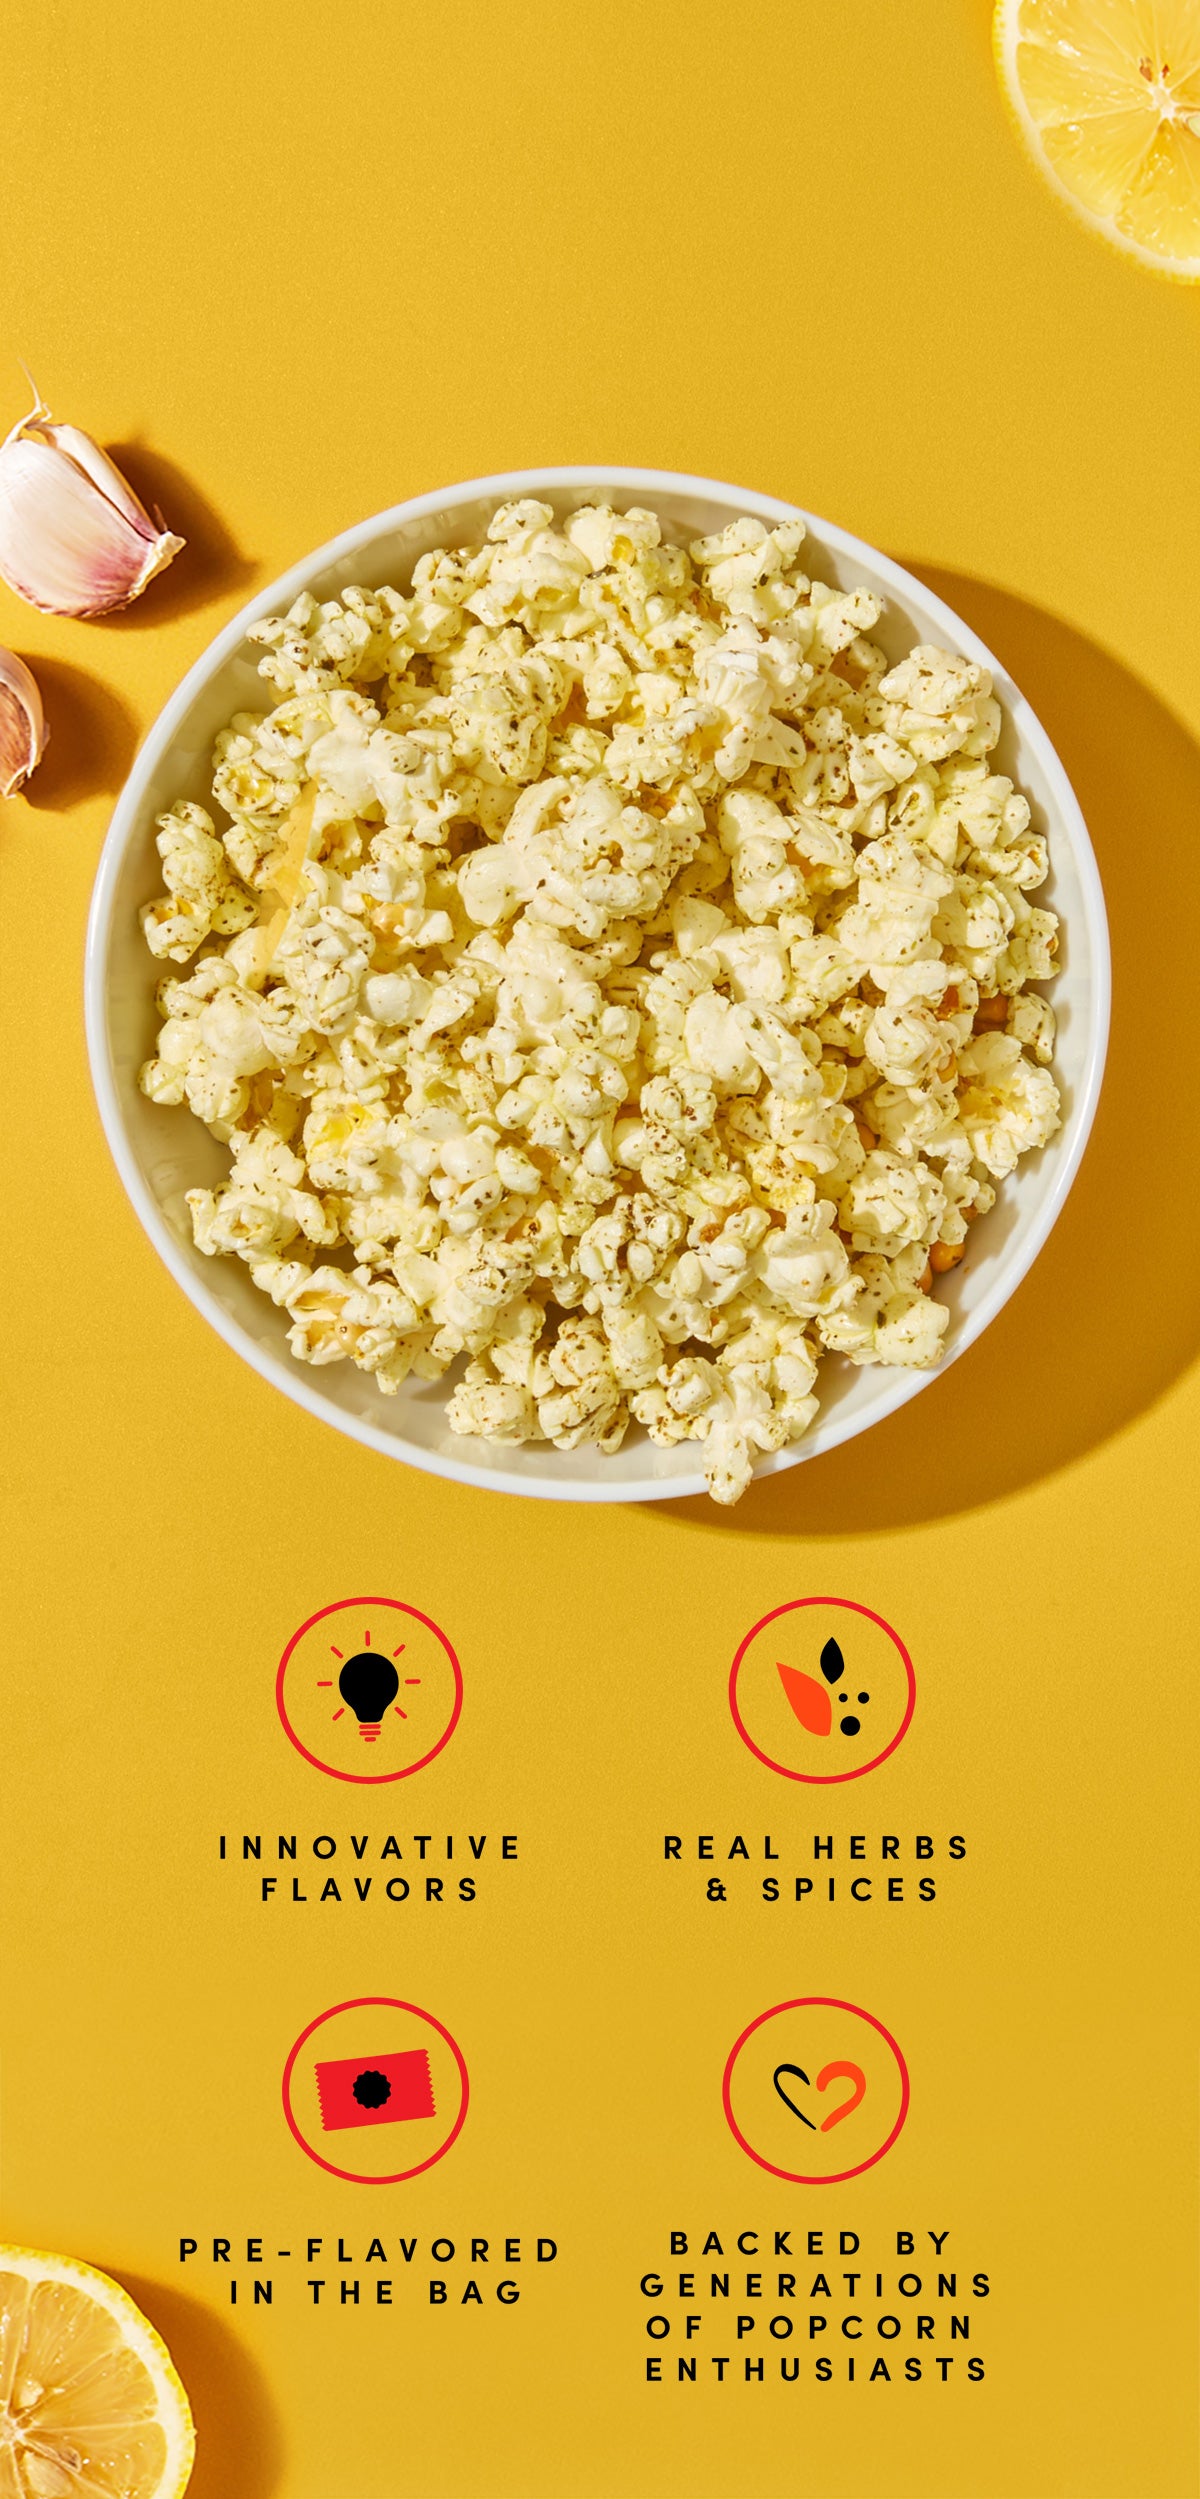 Bowl of Lemon Garlic Popcorn on yellow background with icons depicting "Innovative Flavors", "Real Herbs & Spices", "Pre-Flavored in the Bag" and "Back by Generations of Popcorn Enthusiasts"